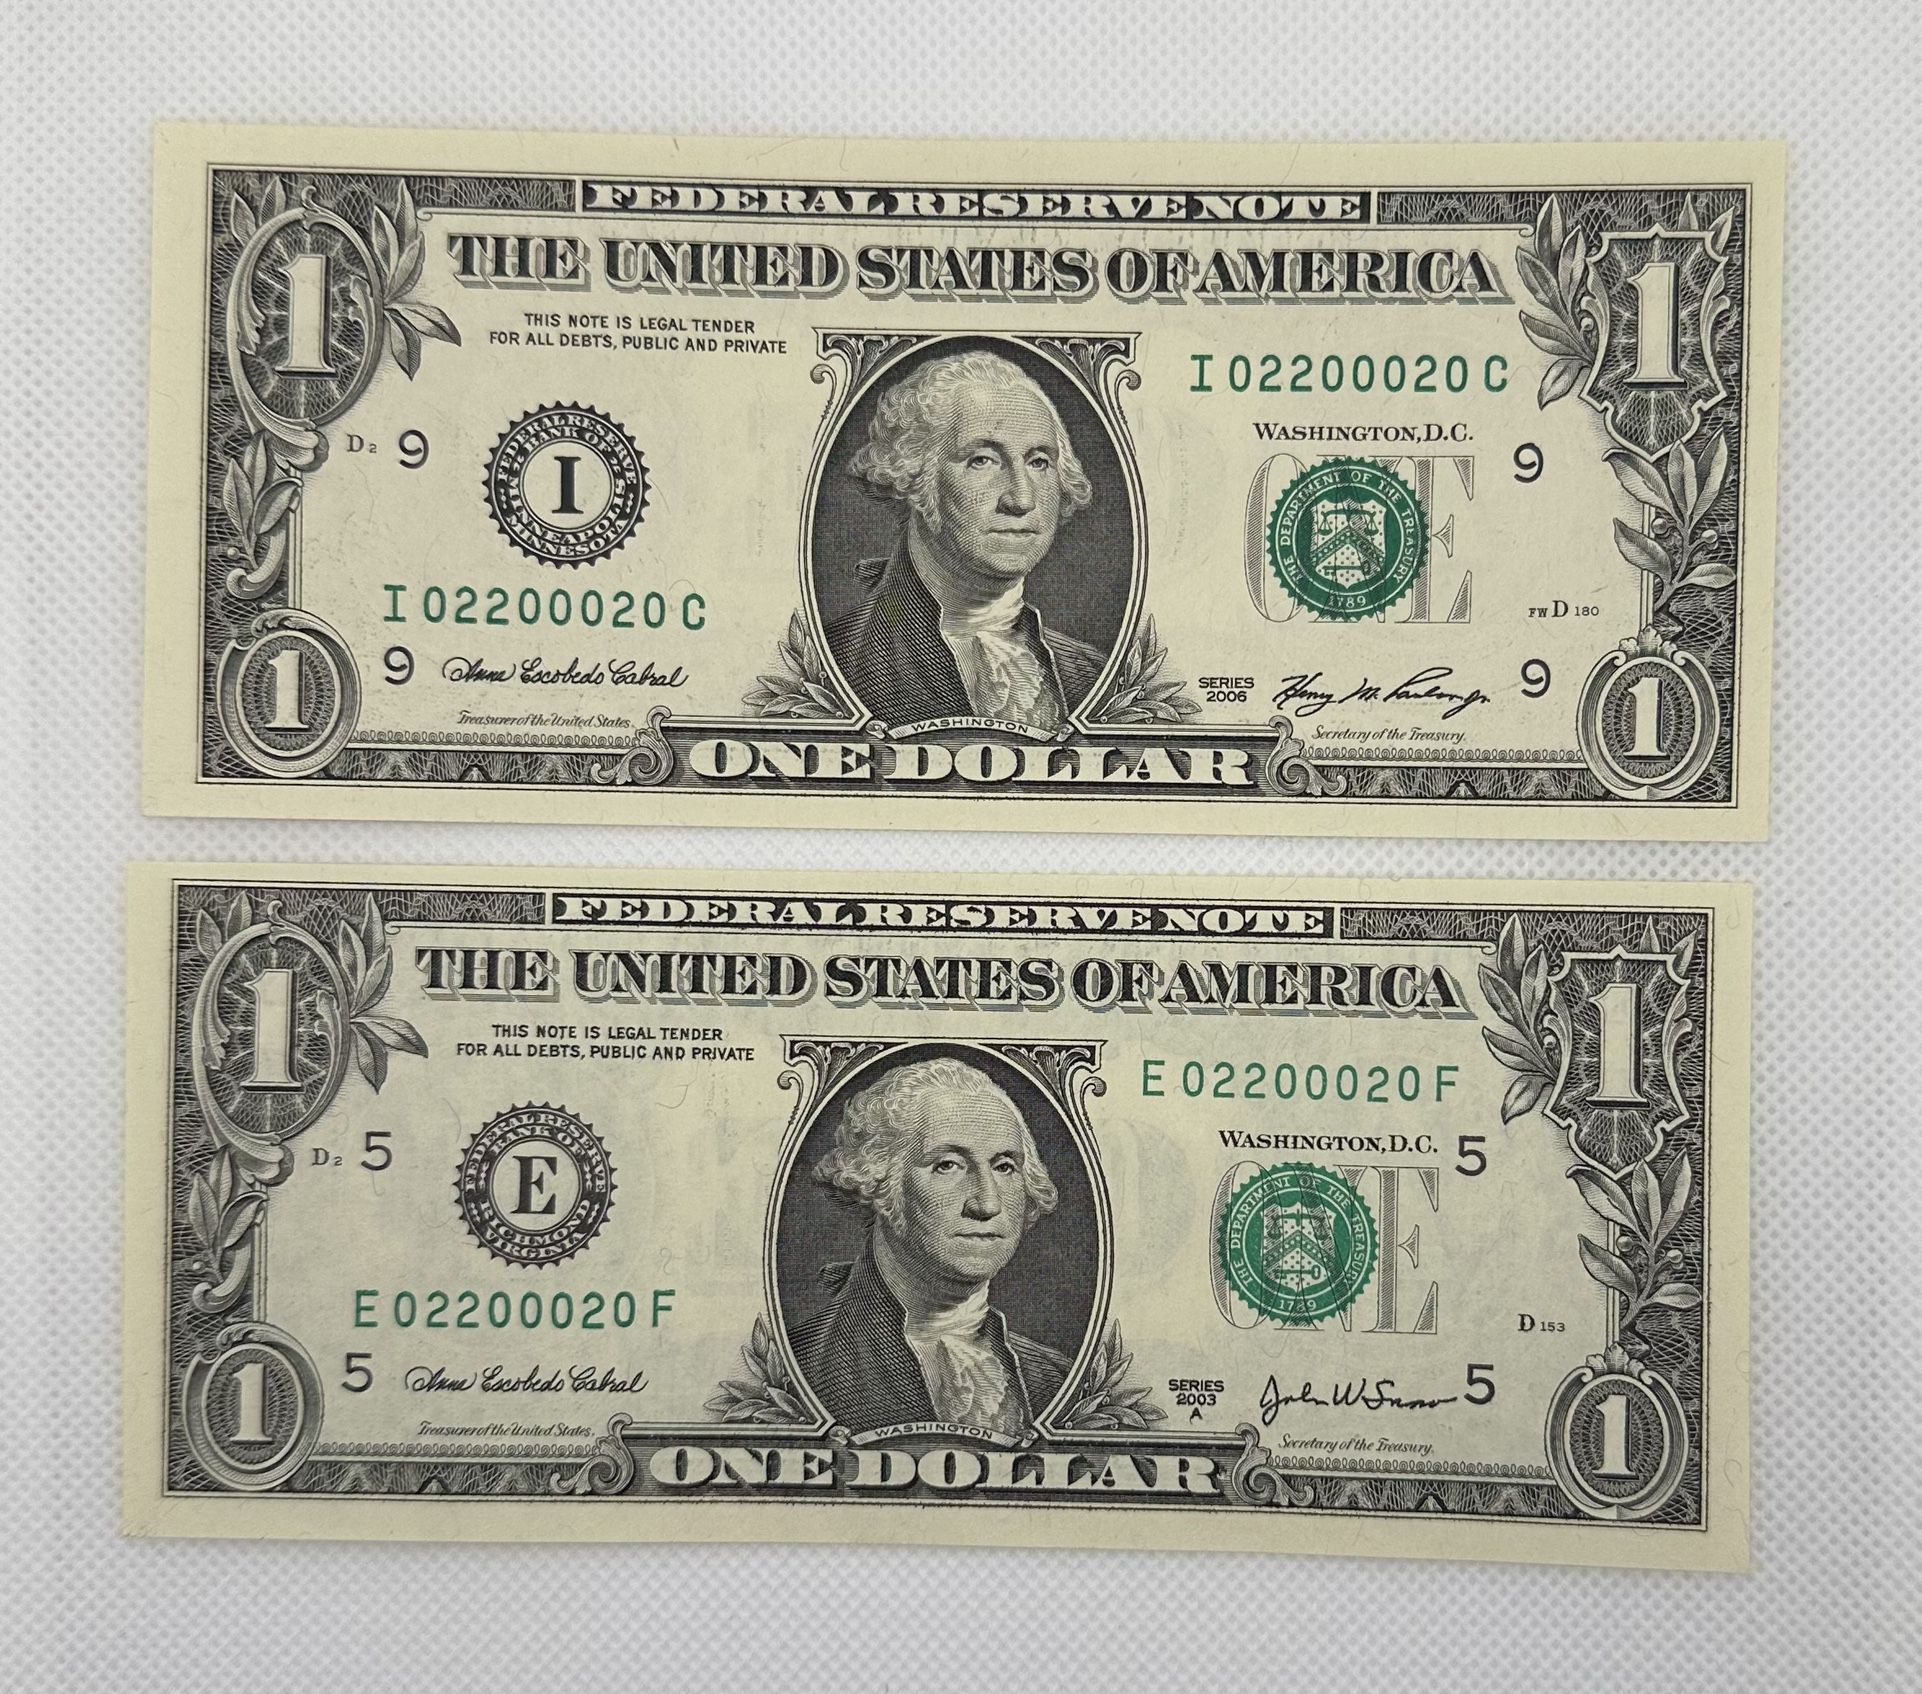 Matching Serial Number $1 Currency